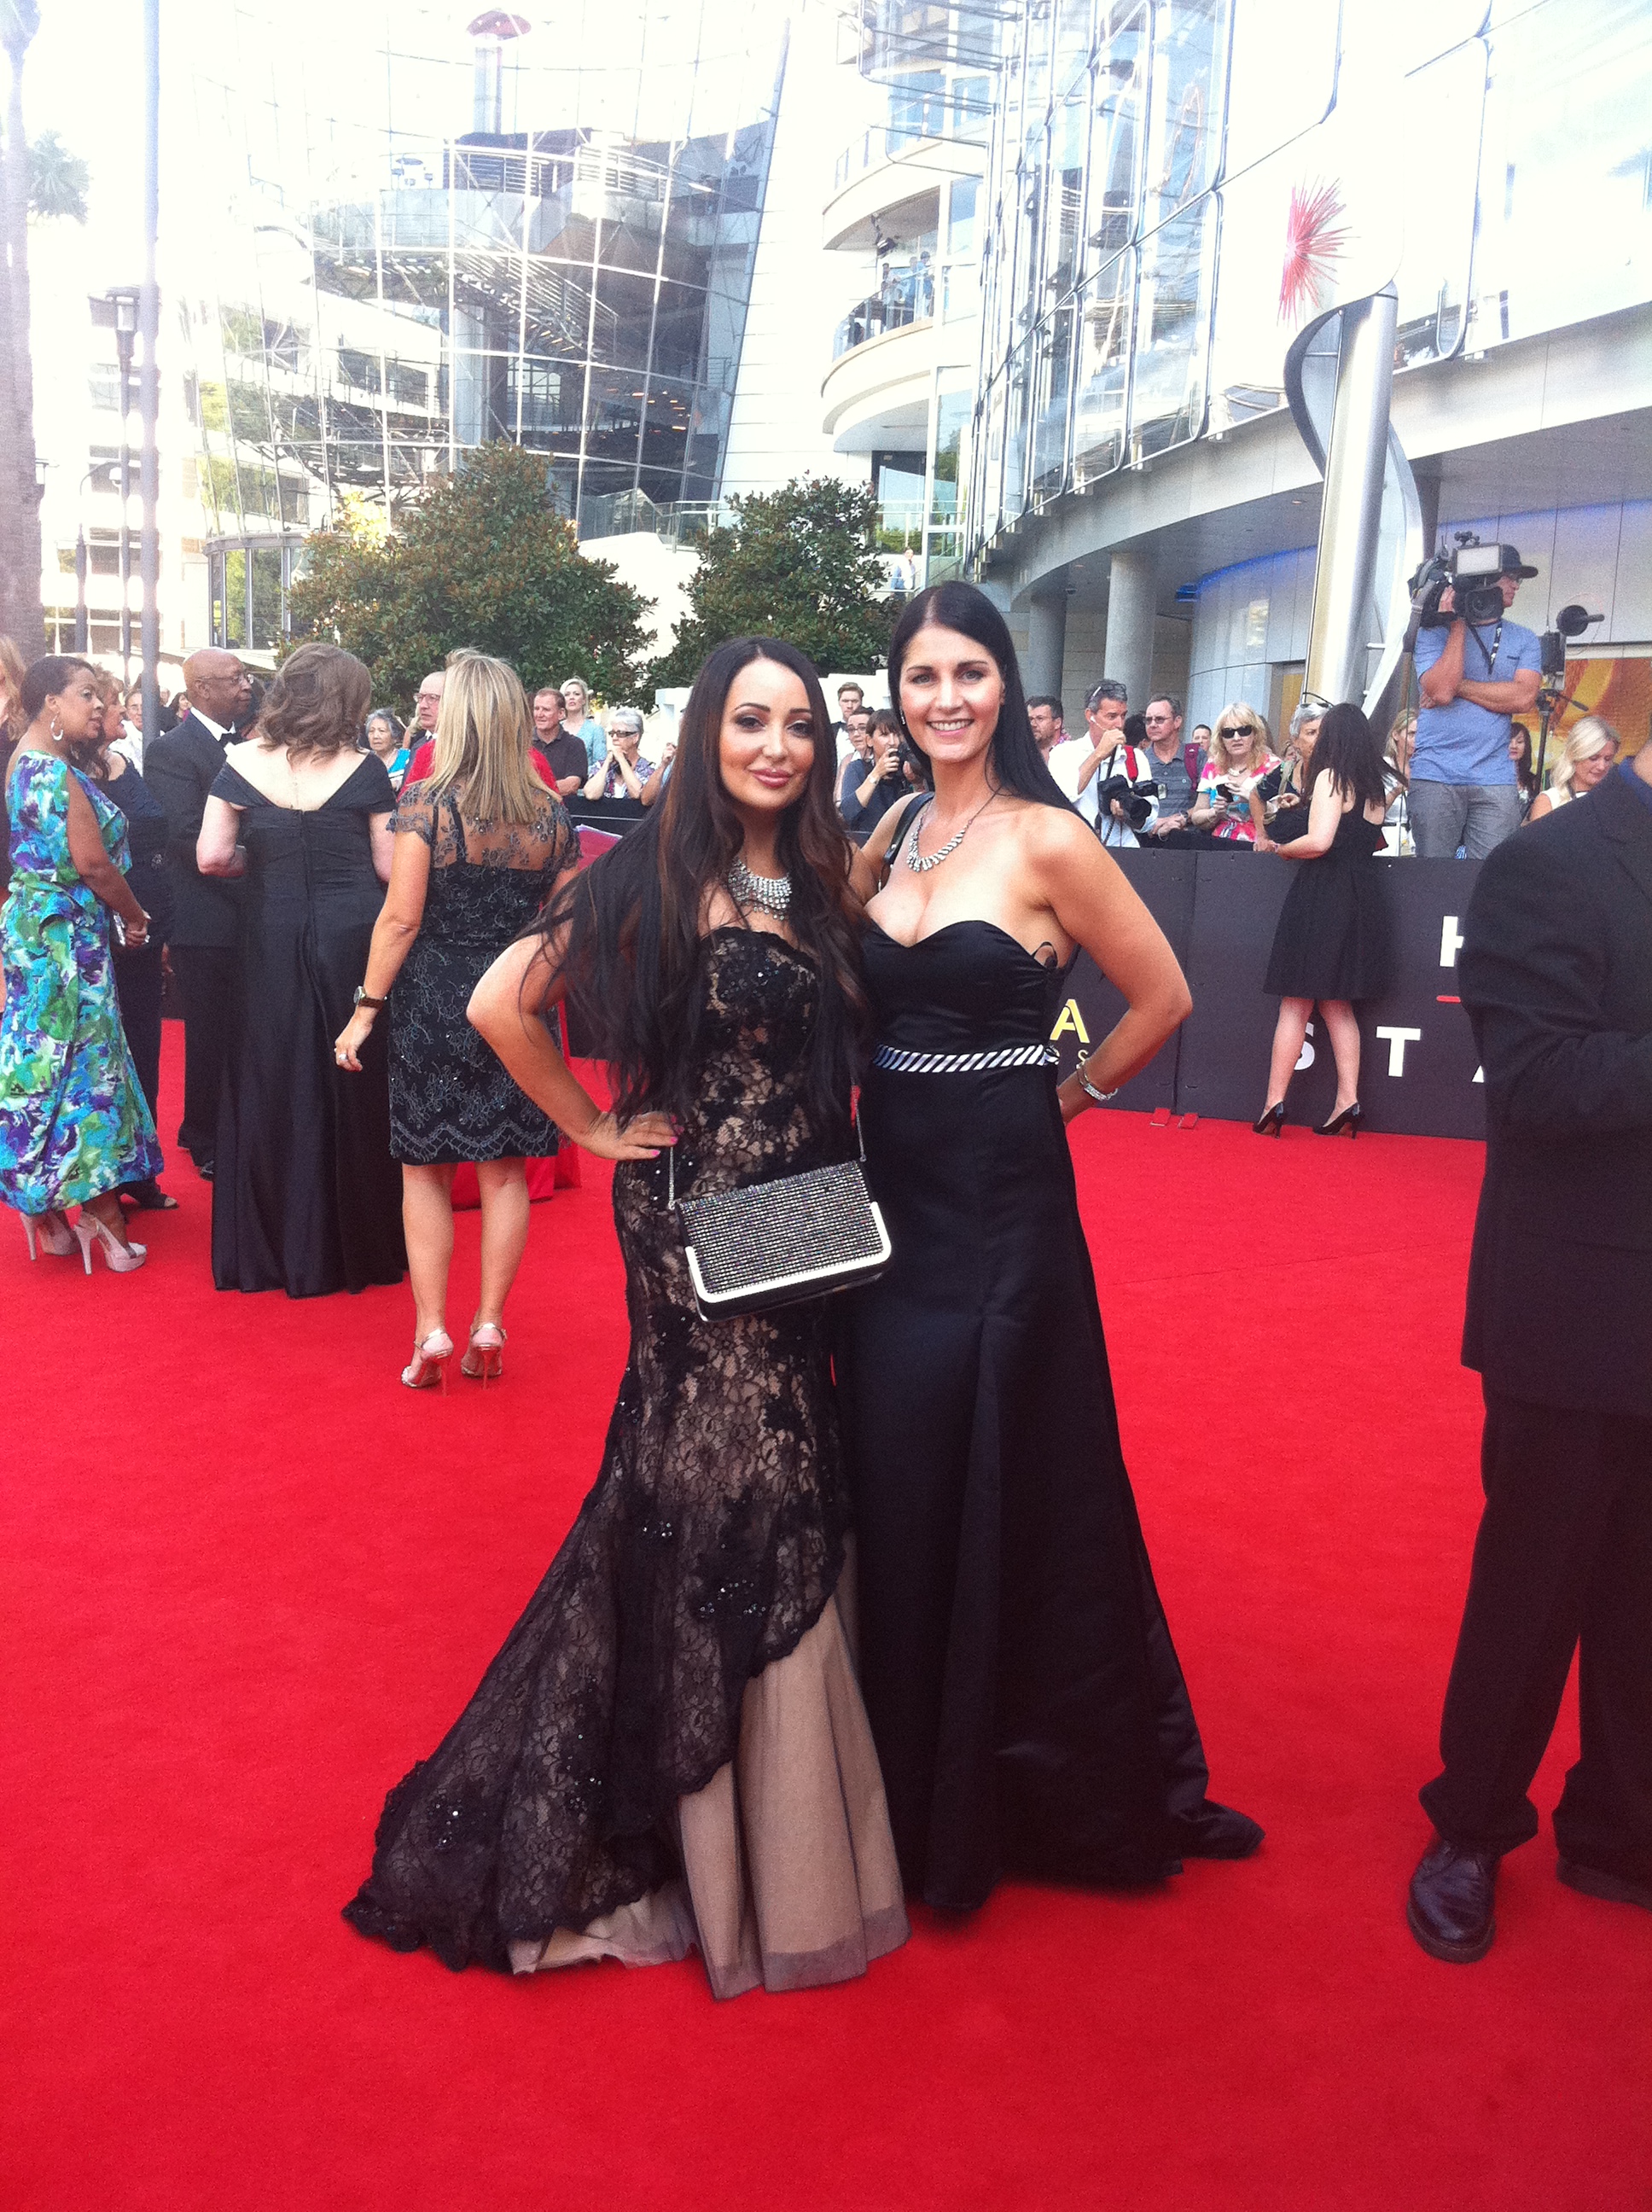 On the red carpet at the 2013 AACTA Actor Awards